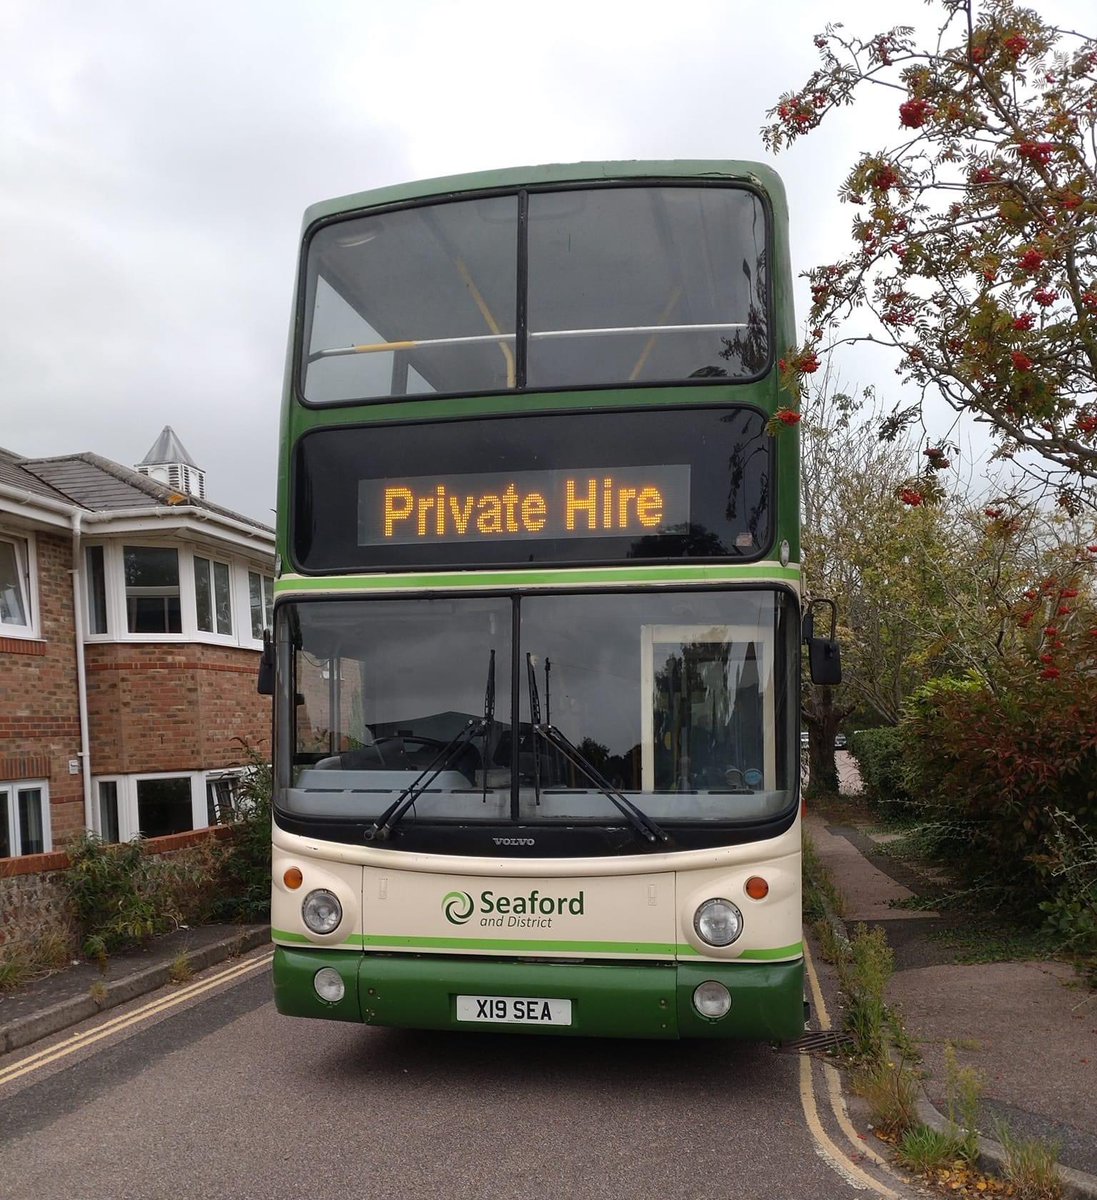 One of our double deckers in Lewes this week operating our weekly school swimming service. We have 80 seater double decker buses available to hire for large group transport. Give us a call on 01273 510181